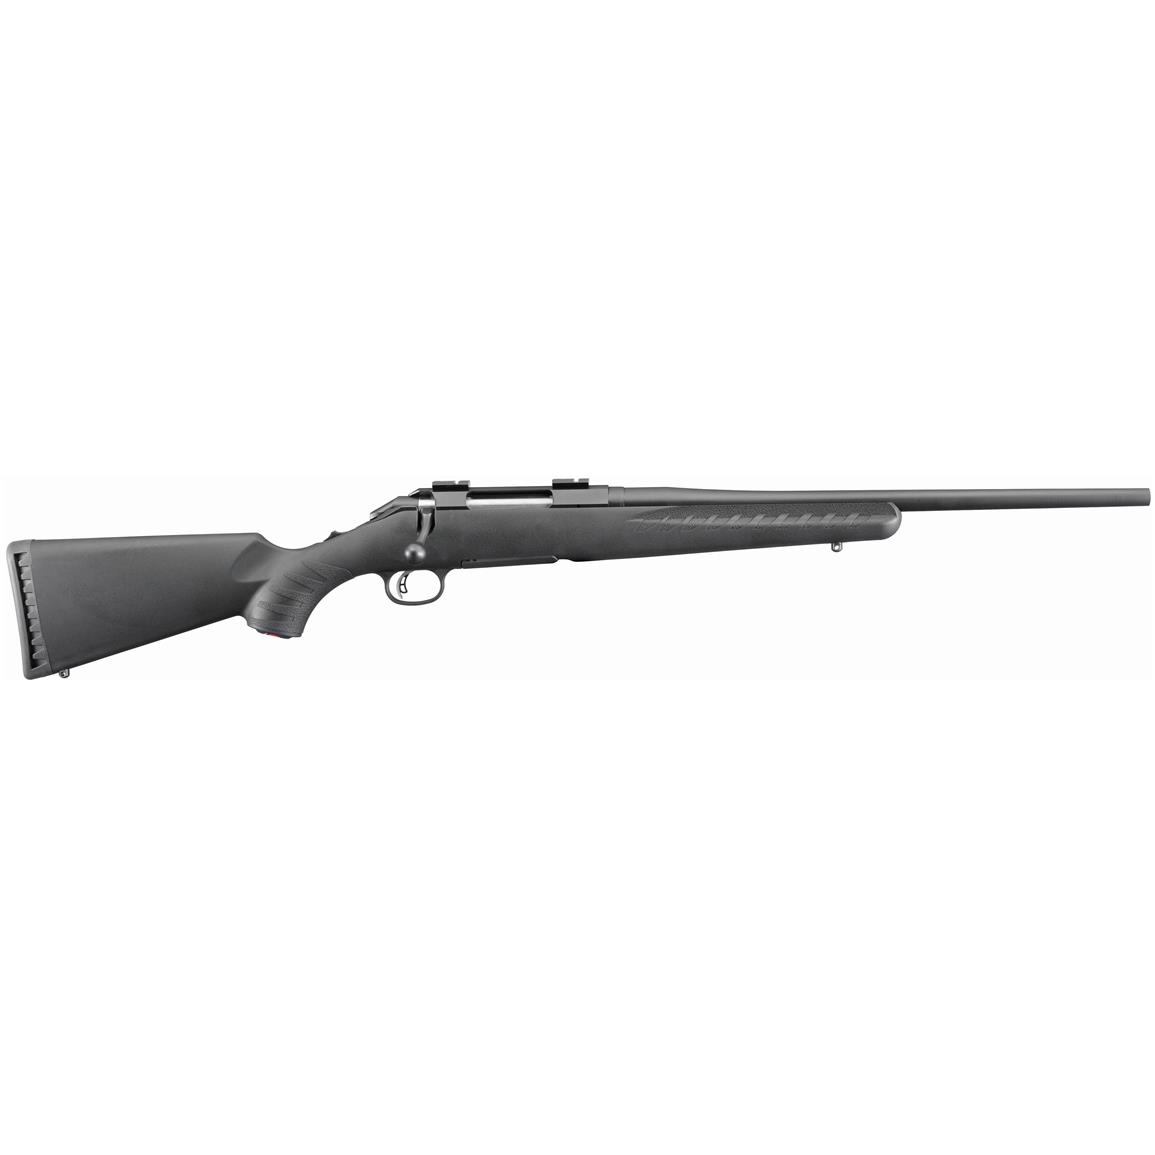 Ruger American Rifle Compact, Bolt Action, .243 Winchester, Centerfire, 18" Barrel, 4 Rounds